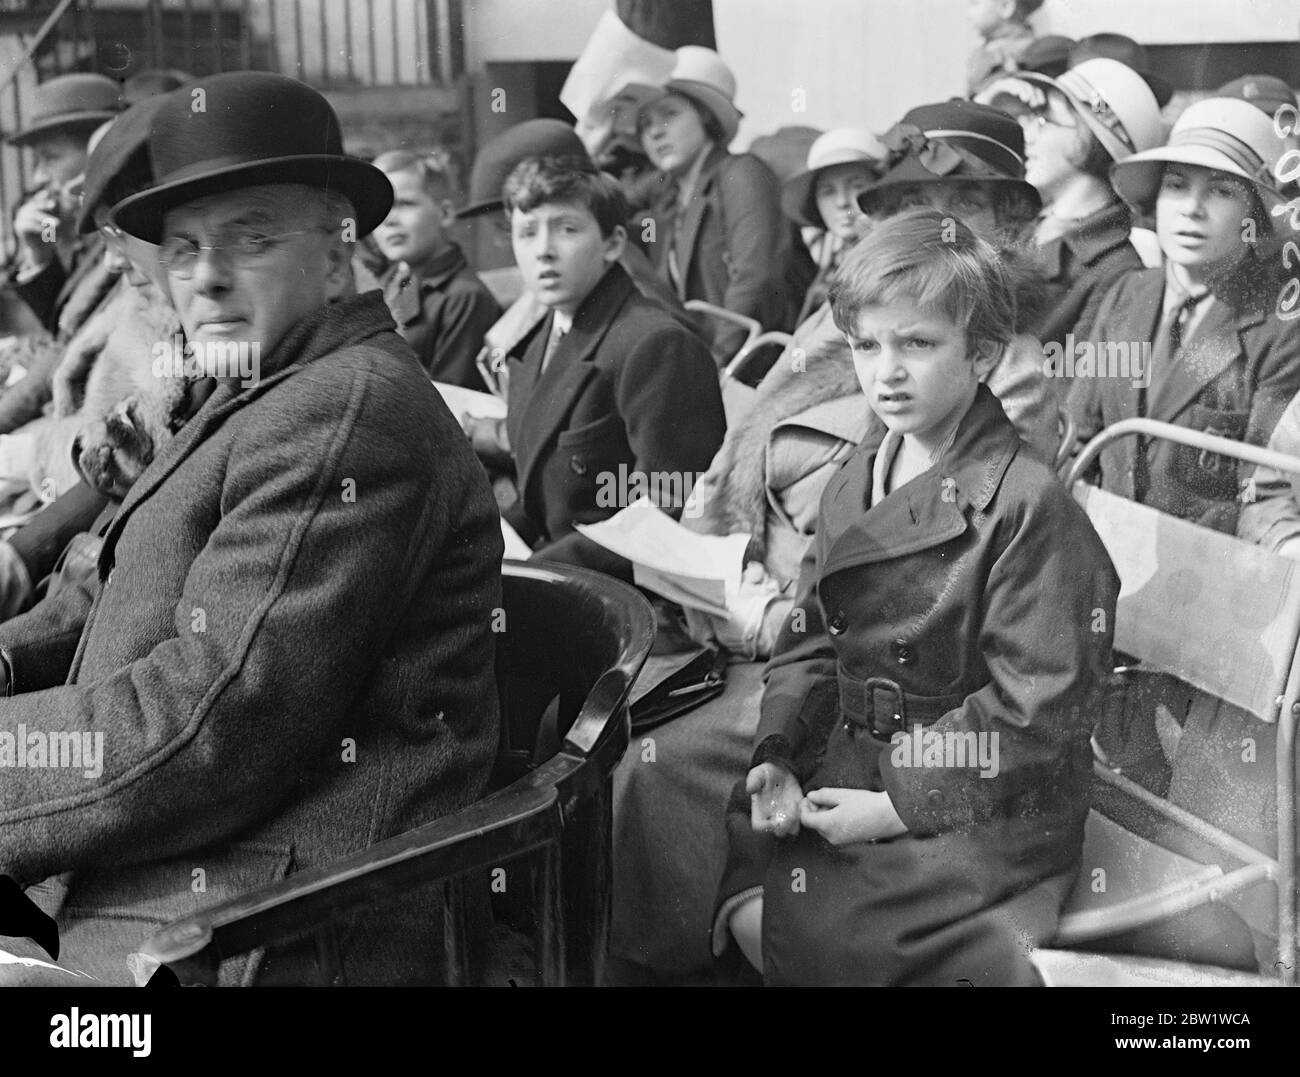 Anthony Eden's sons watch as fire brigade gieves last display at old headquarters. The last display before the brigade's removal to the new building on the Albert Embankment, was given by the London Fire Brigade at the old headquarters in Southwark. Photo shows: the two sons of Mr Anthony Eden - Simon, the eldest and Nicholas - watching the last display. 28 April 1937 Stock Photo